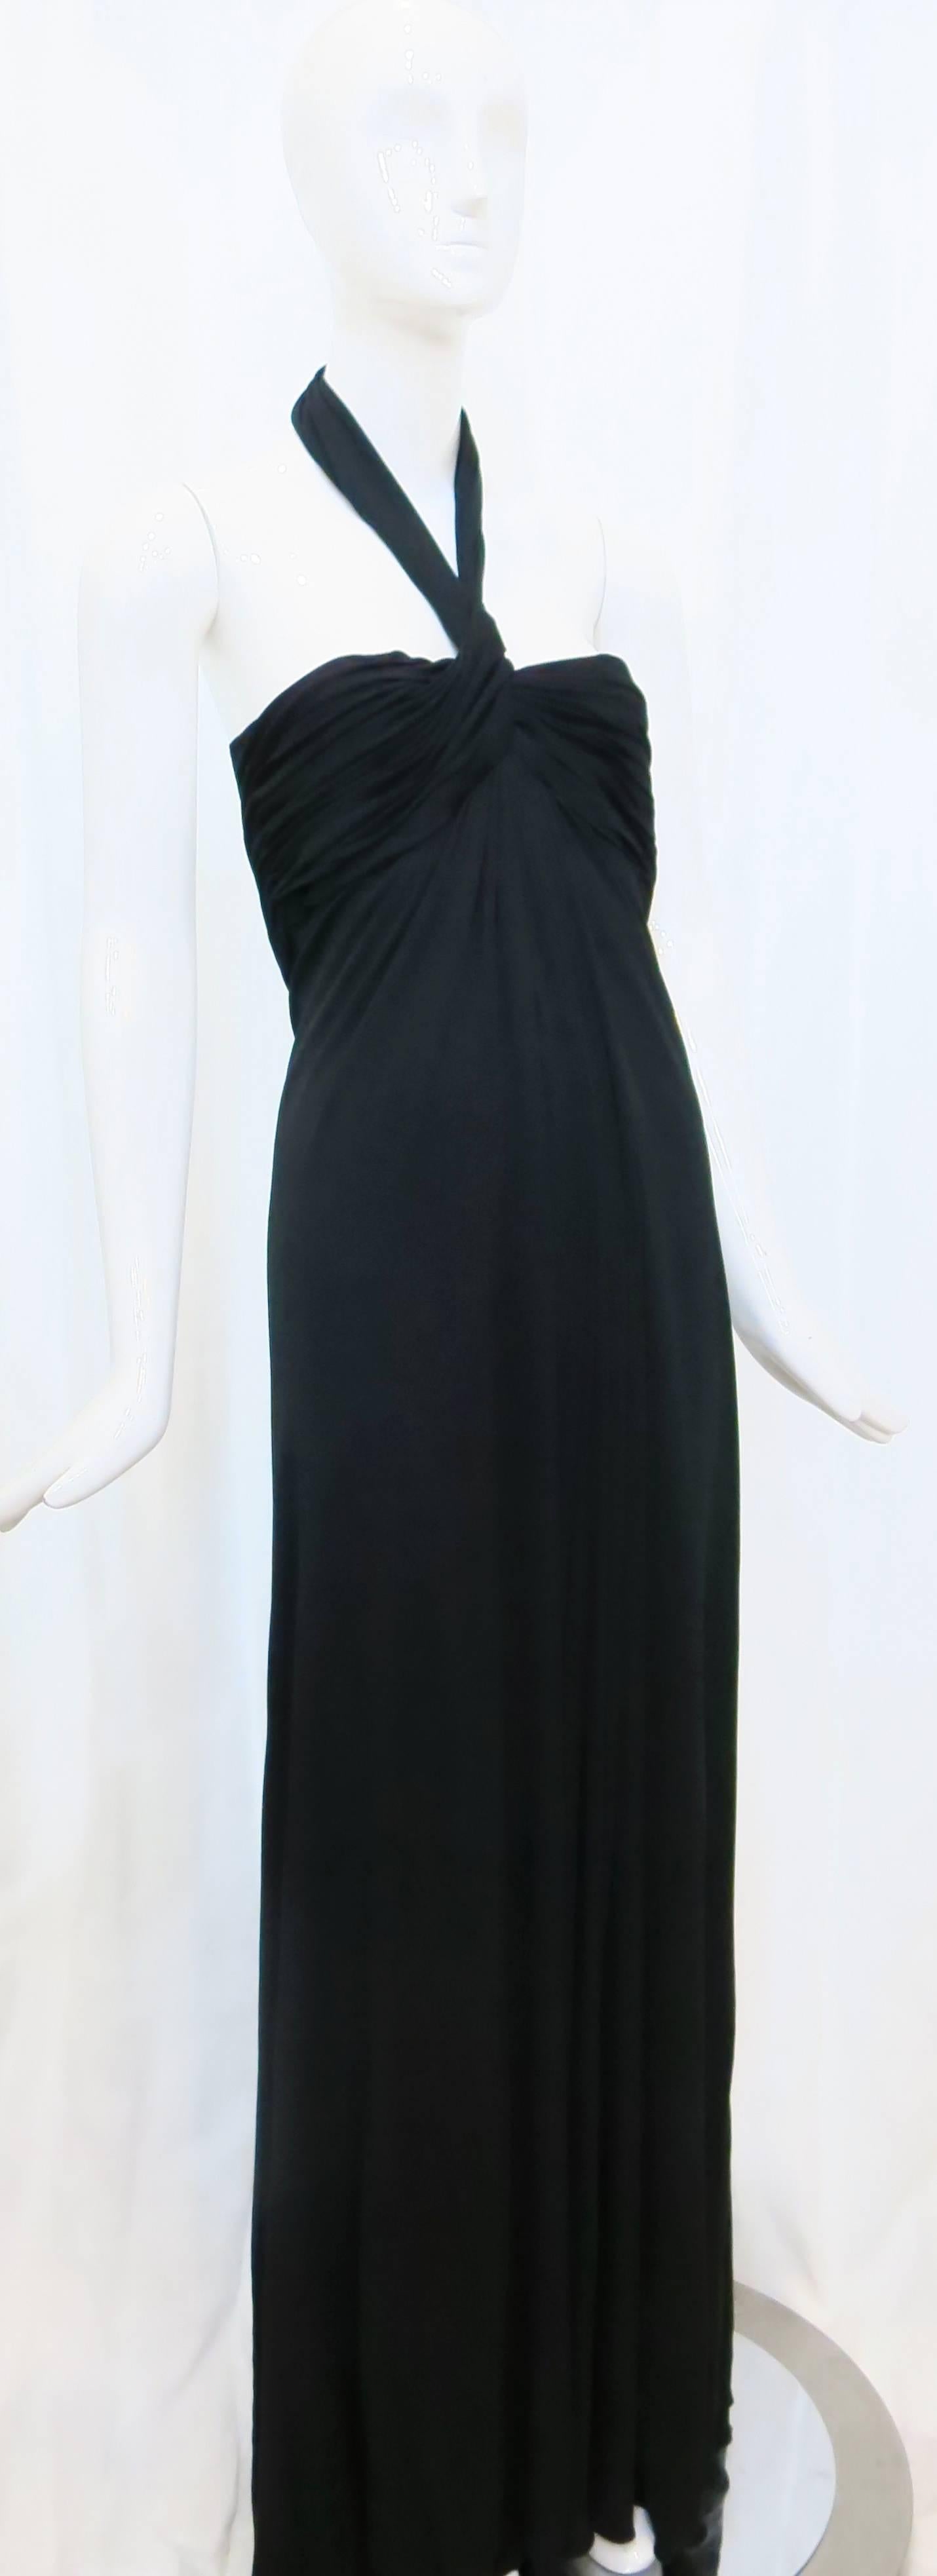 Women's 1970s Bill Tice for Malcolm Starr Black Halter Gown For Sale